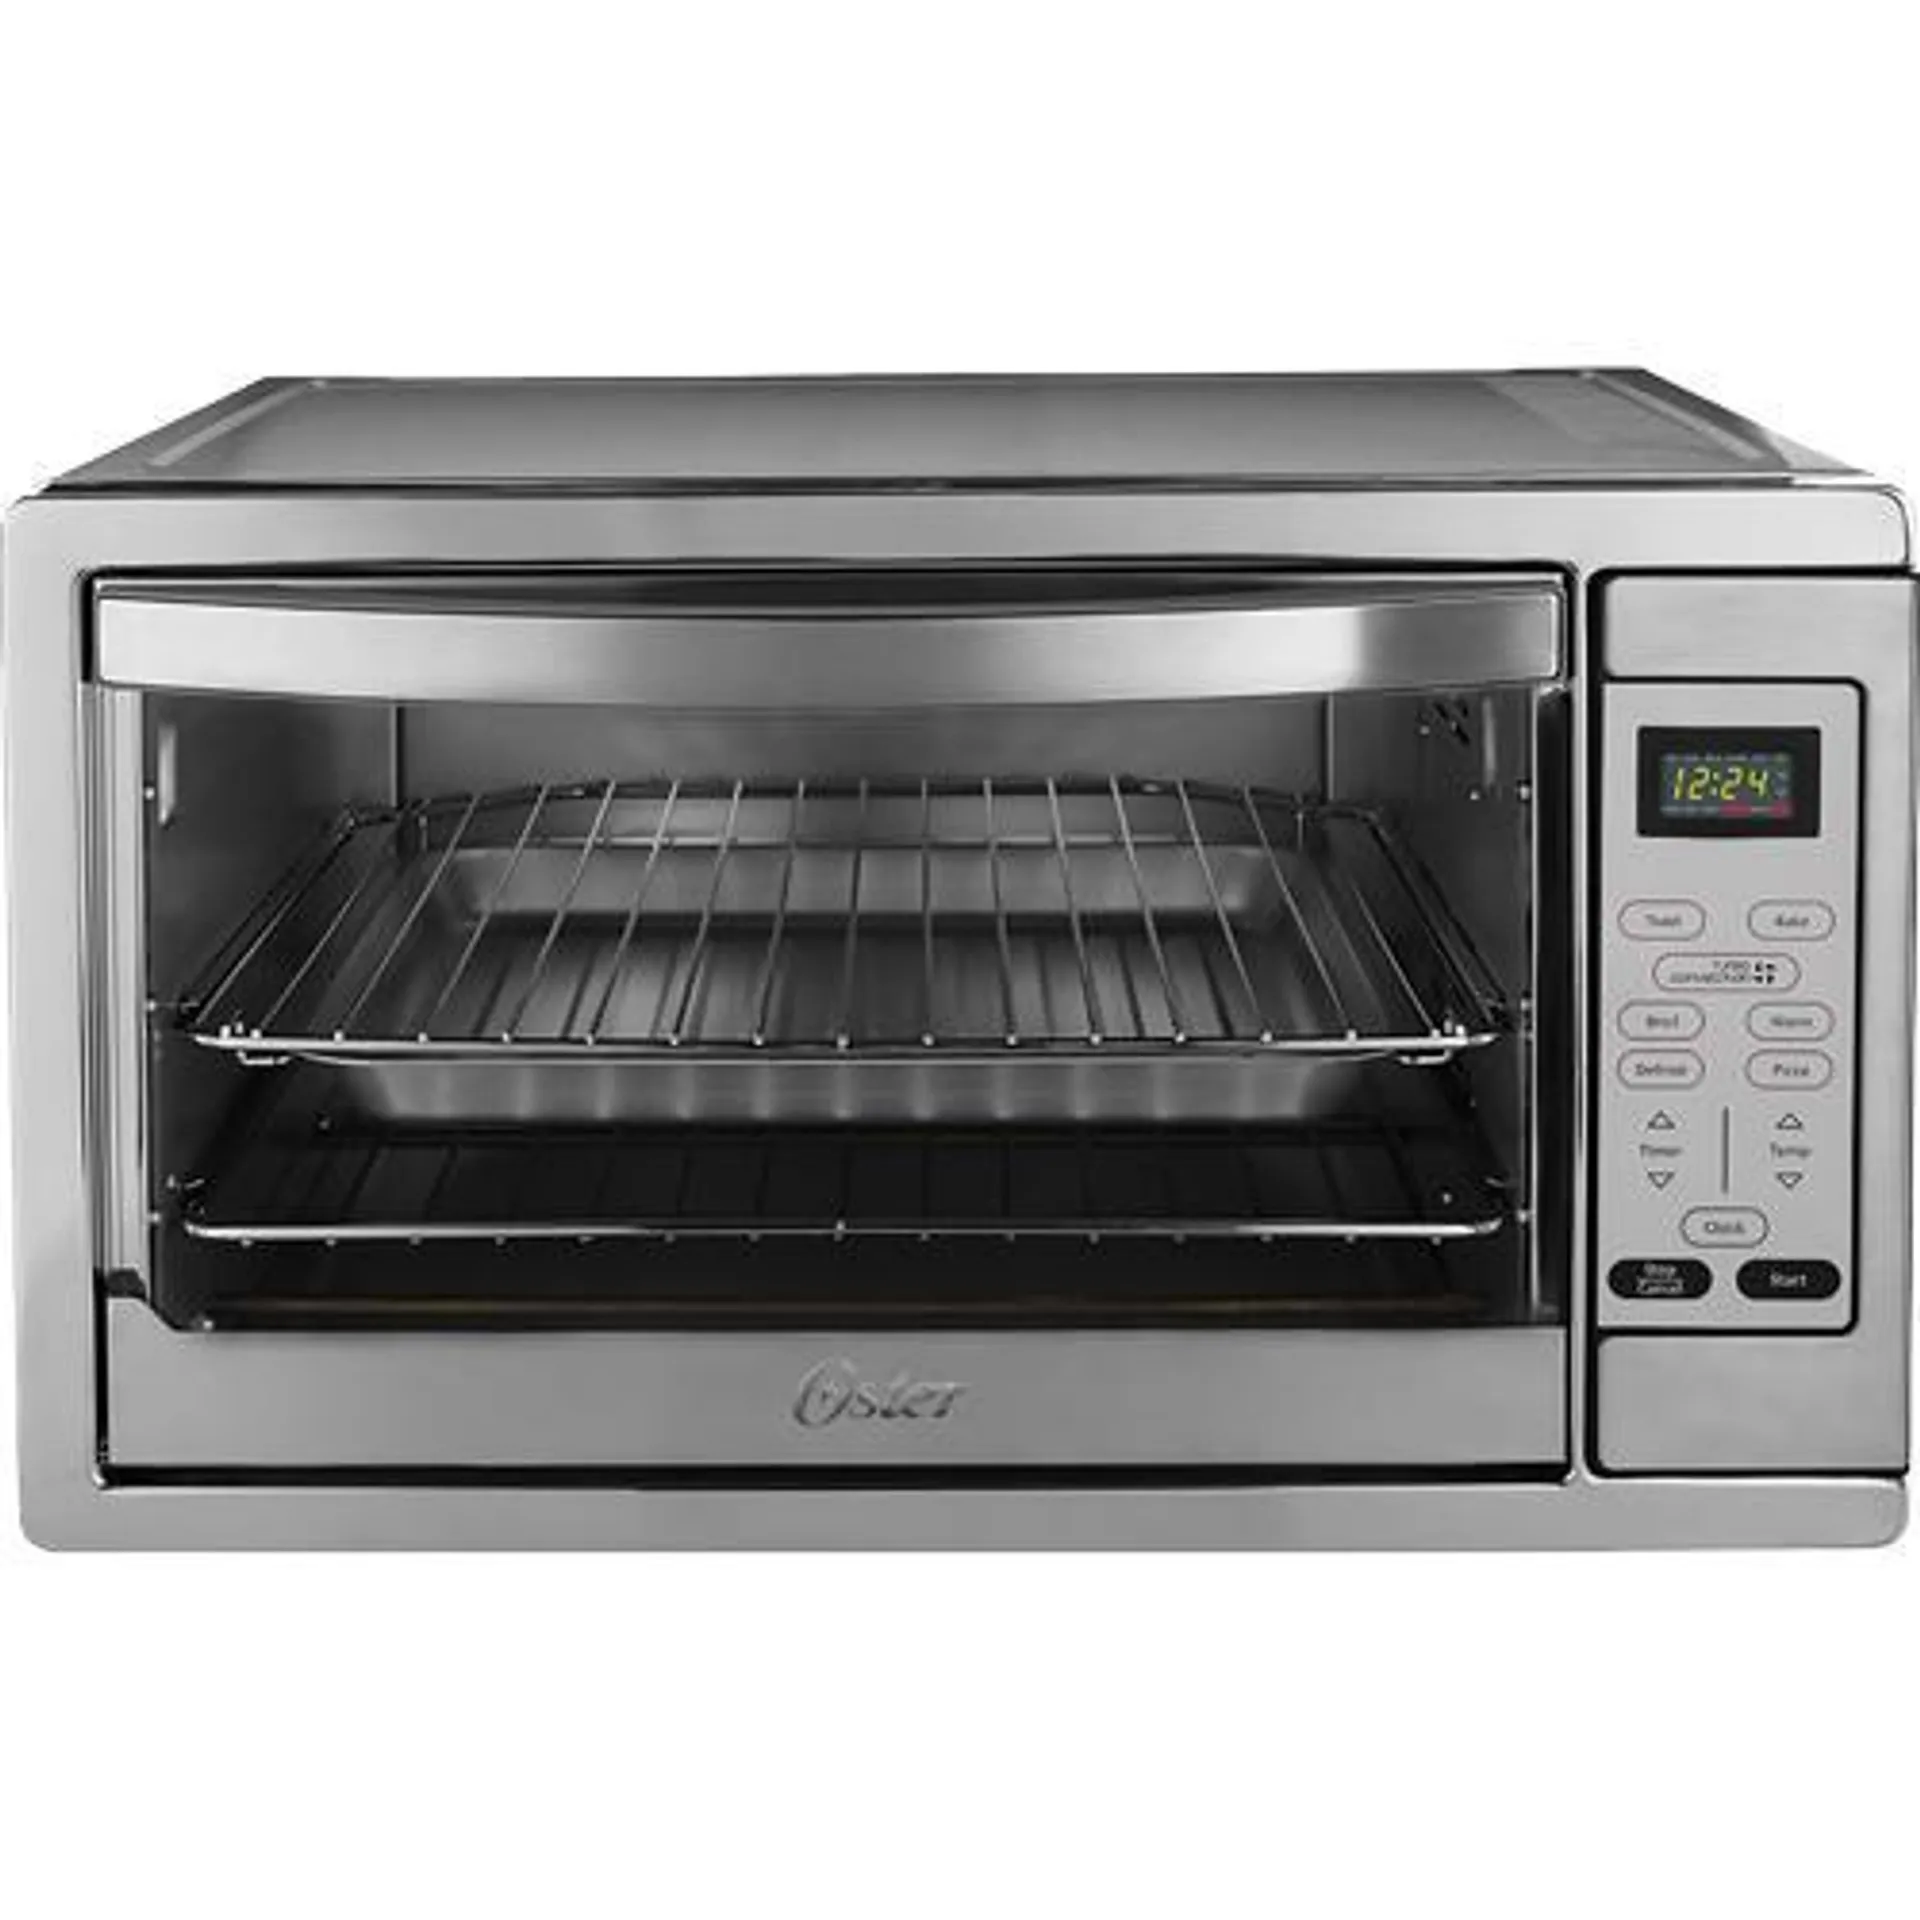 Extra Large Digital Countertop Oven - Brushed Stainless Steel